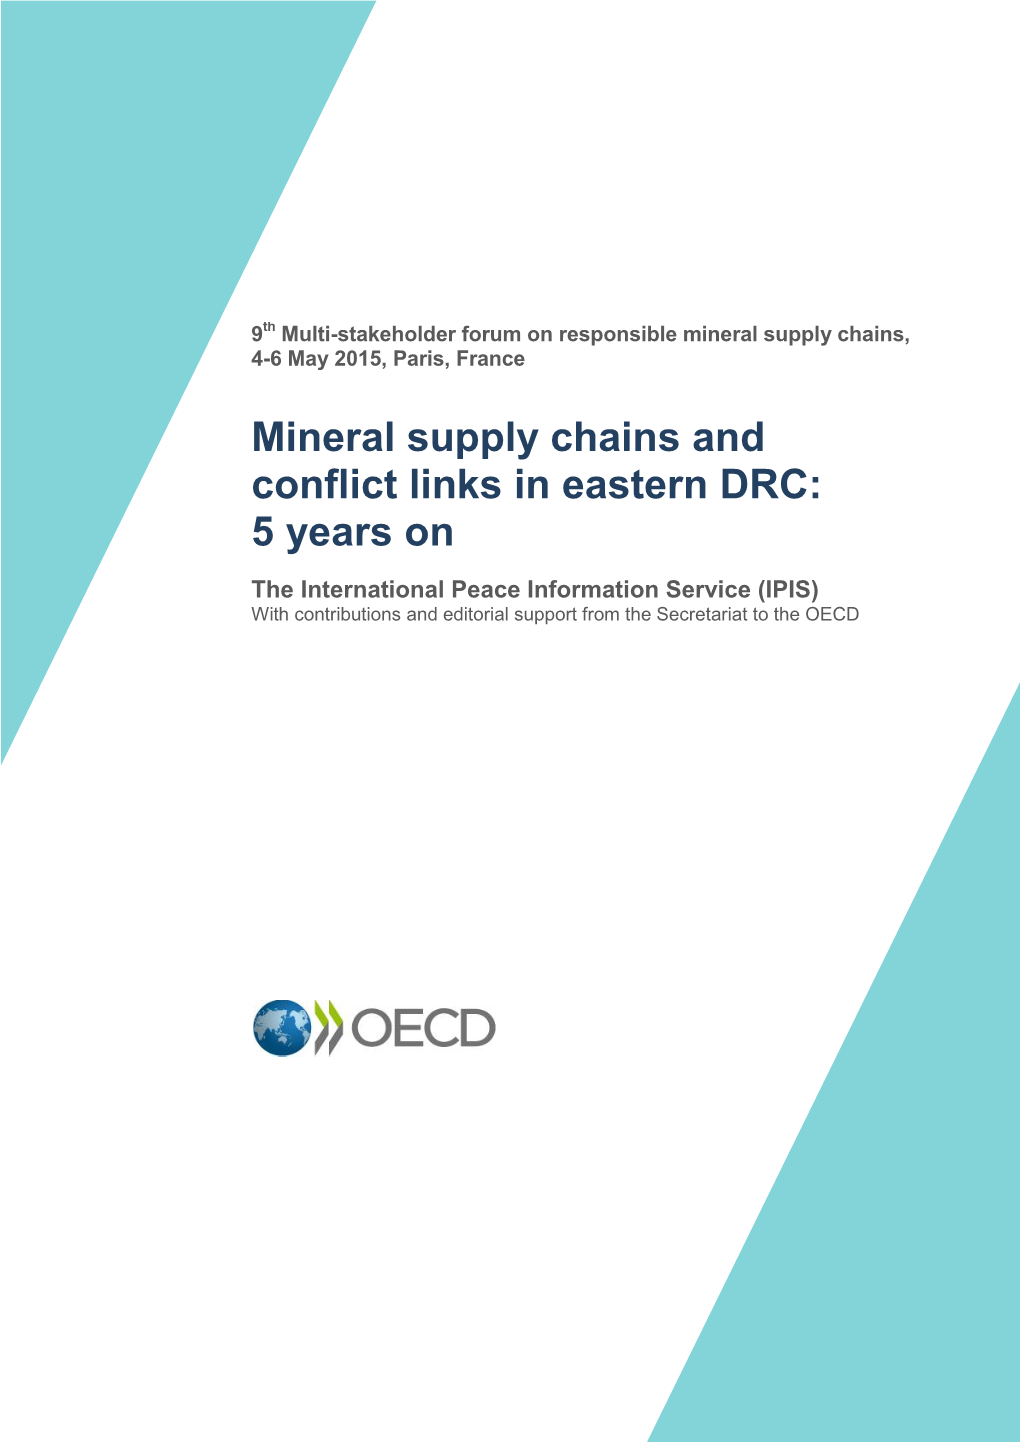 Mineral Supply Chains and Conflict Links in Eastern DRC: 5 Years On